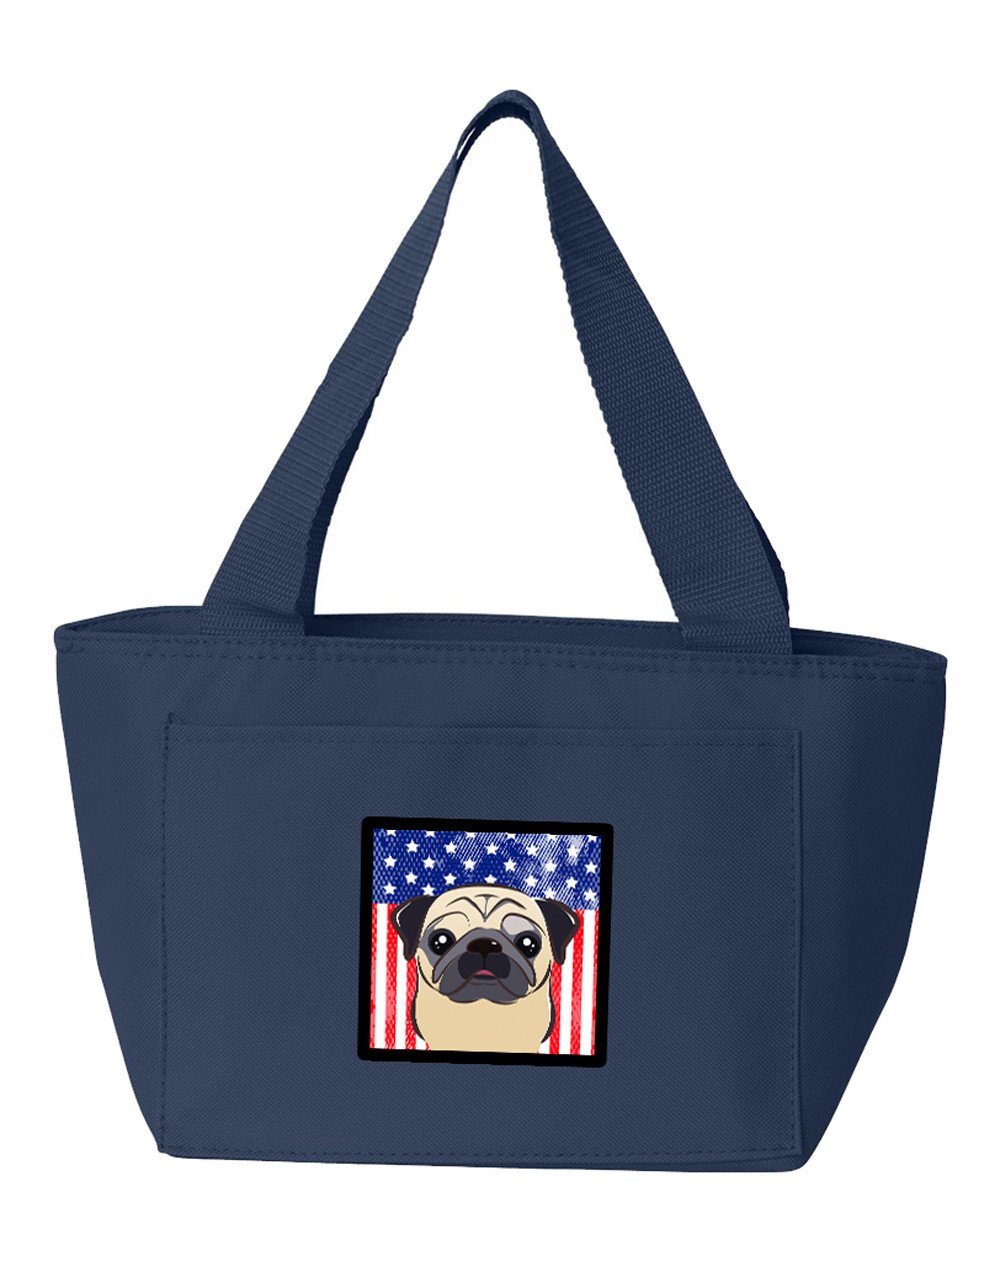 American Flag and Fawn Pug Lunch Bag BB2192NA-8808 by Caroline's Treasures